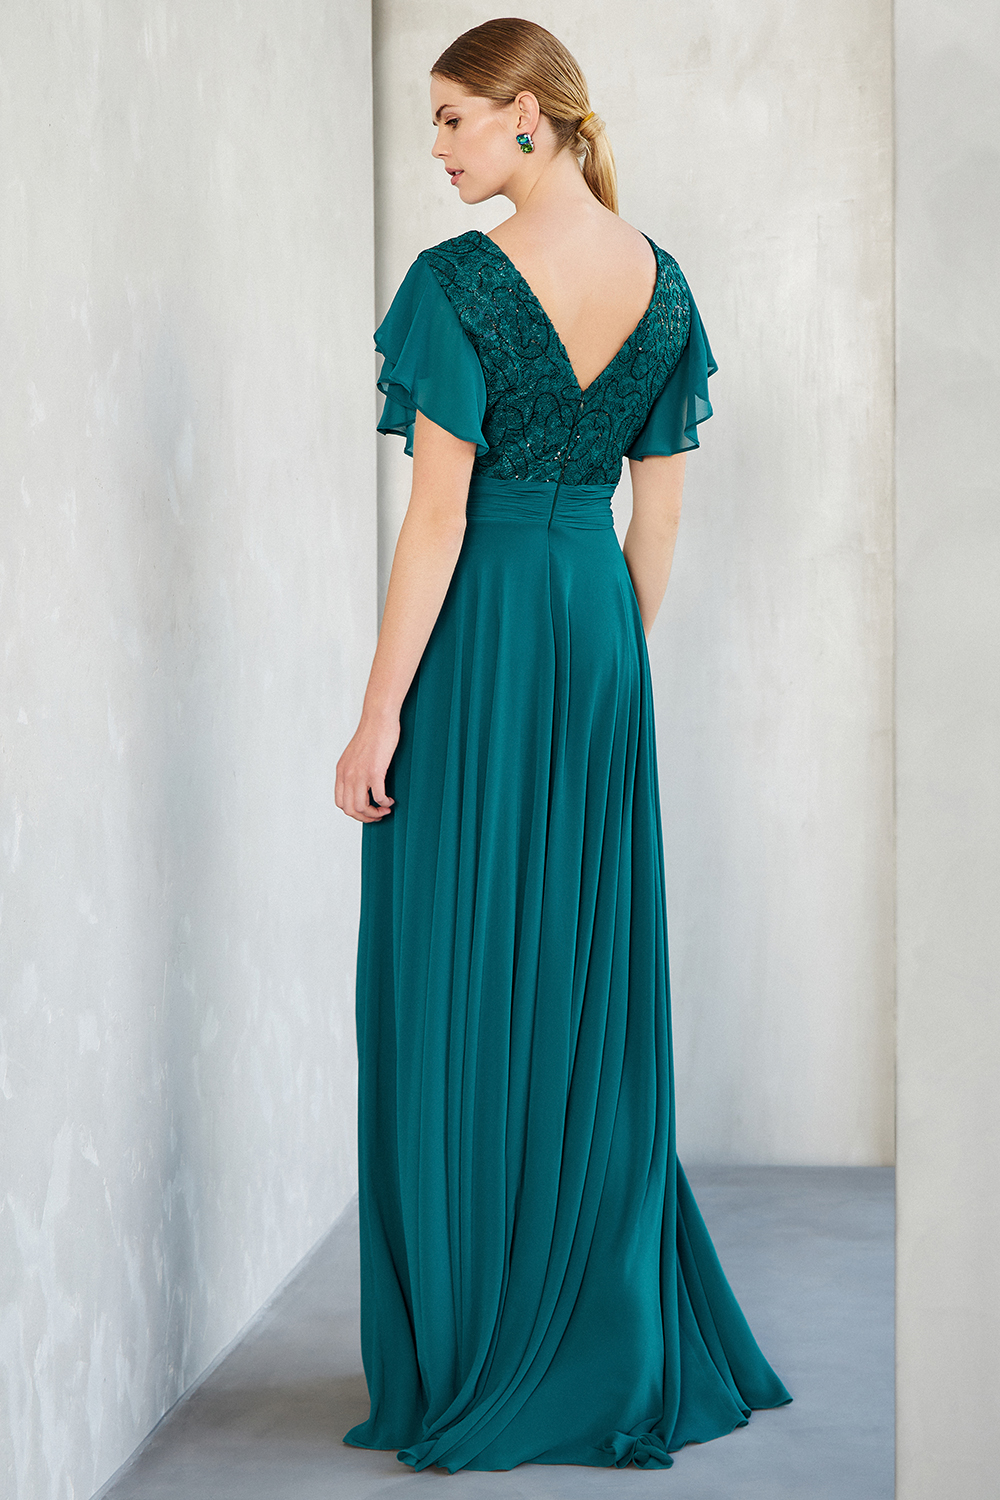 Классические платья / Long evening chiffon dress with lace and beading at the top